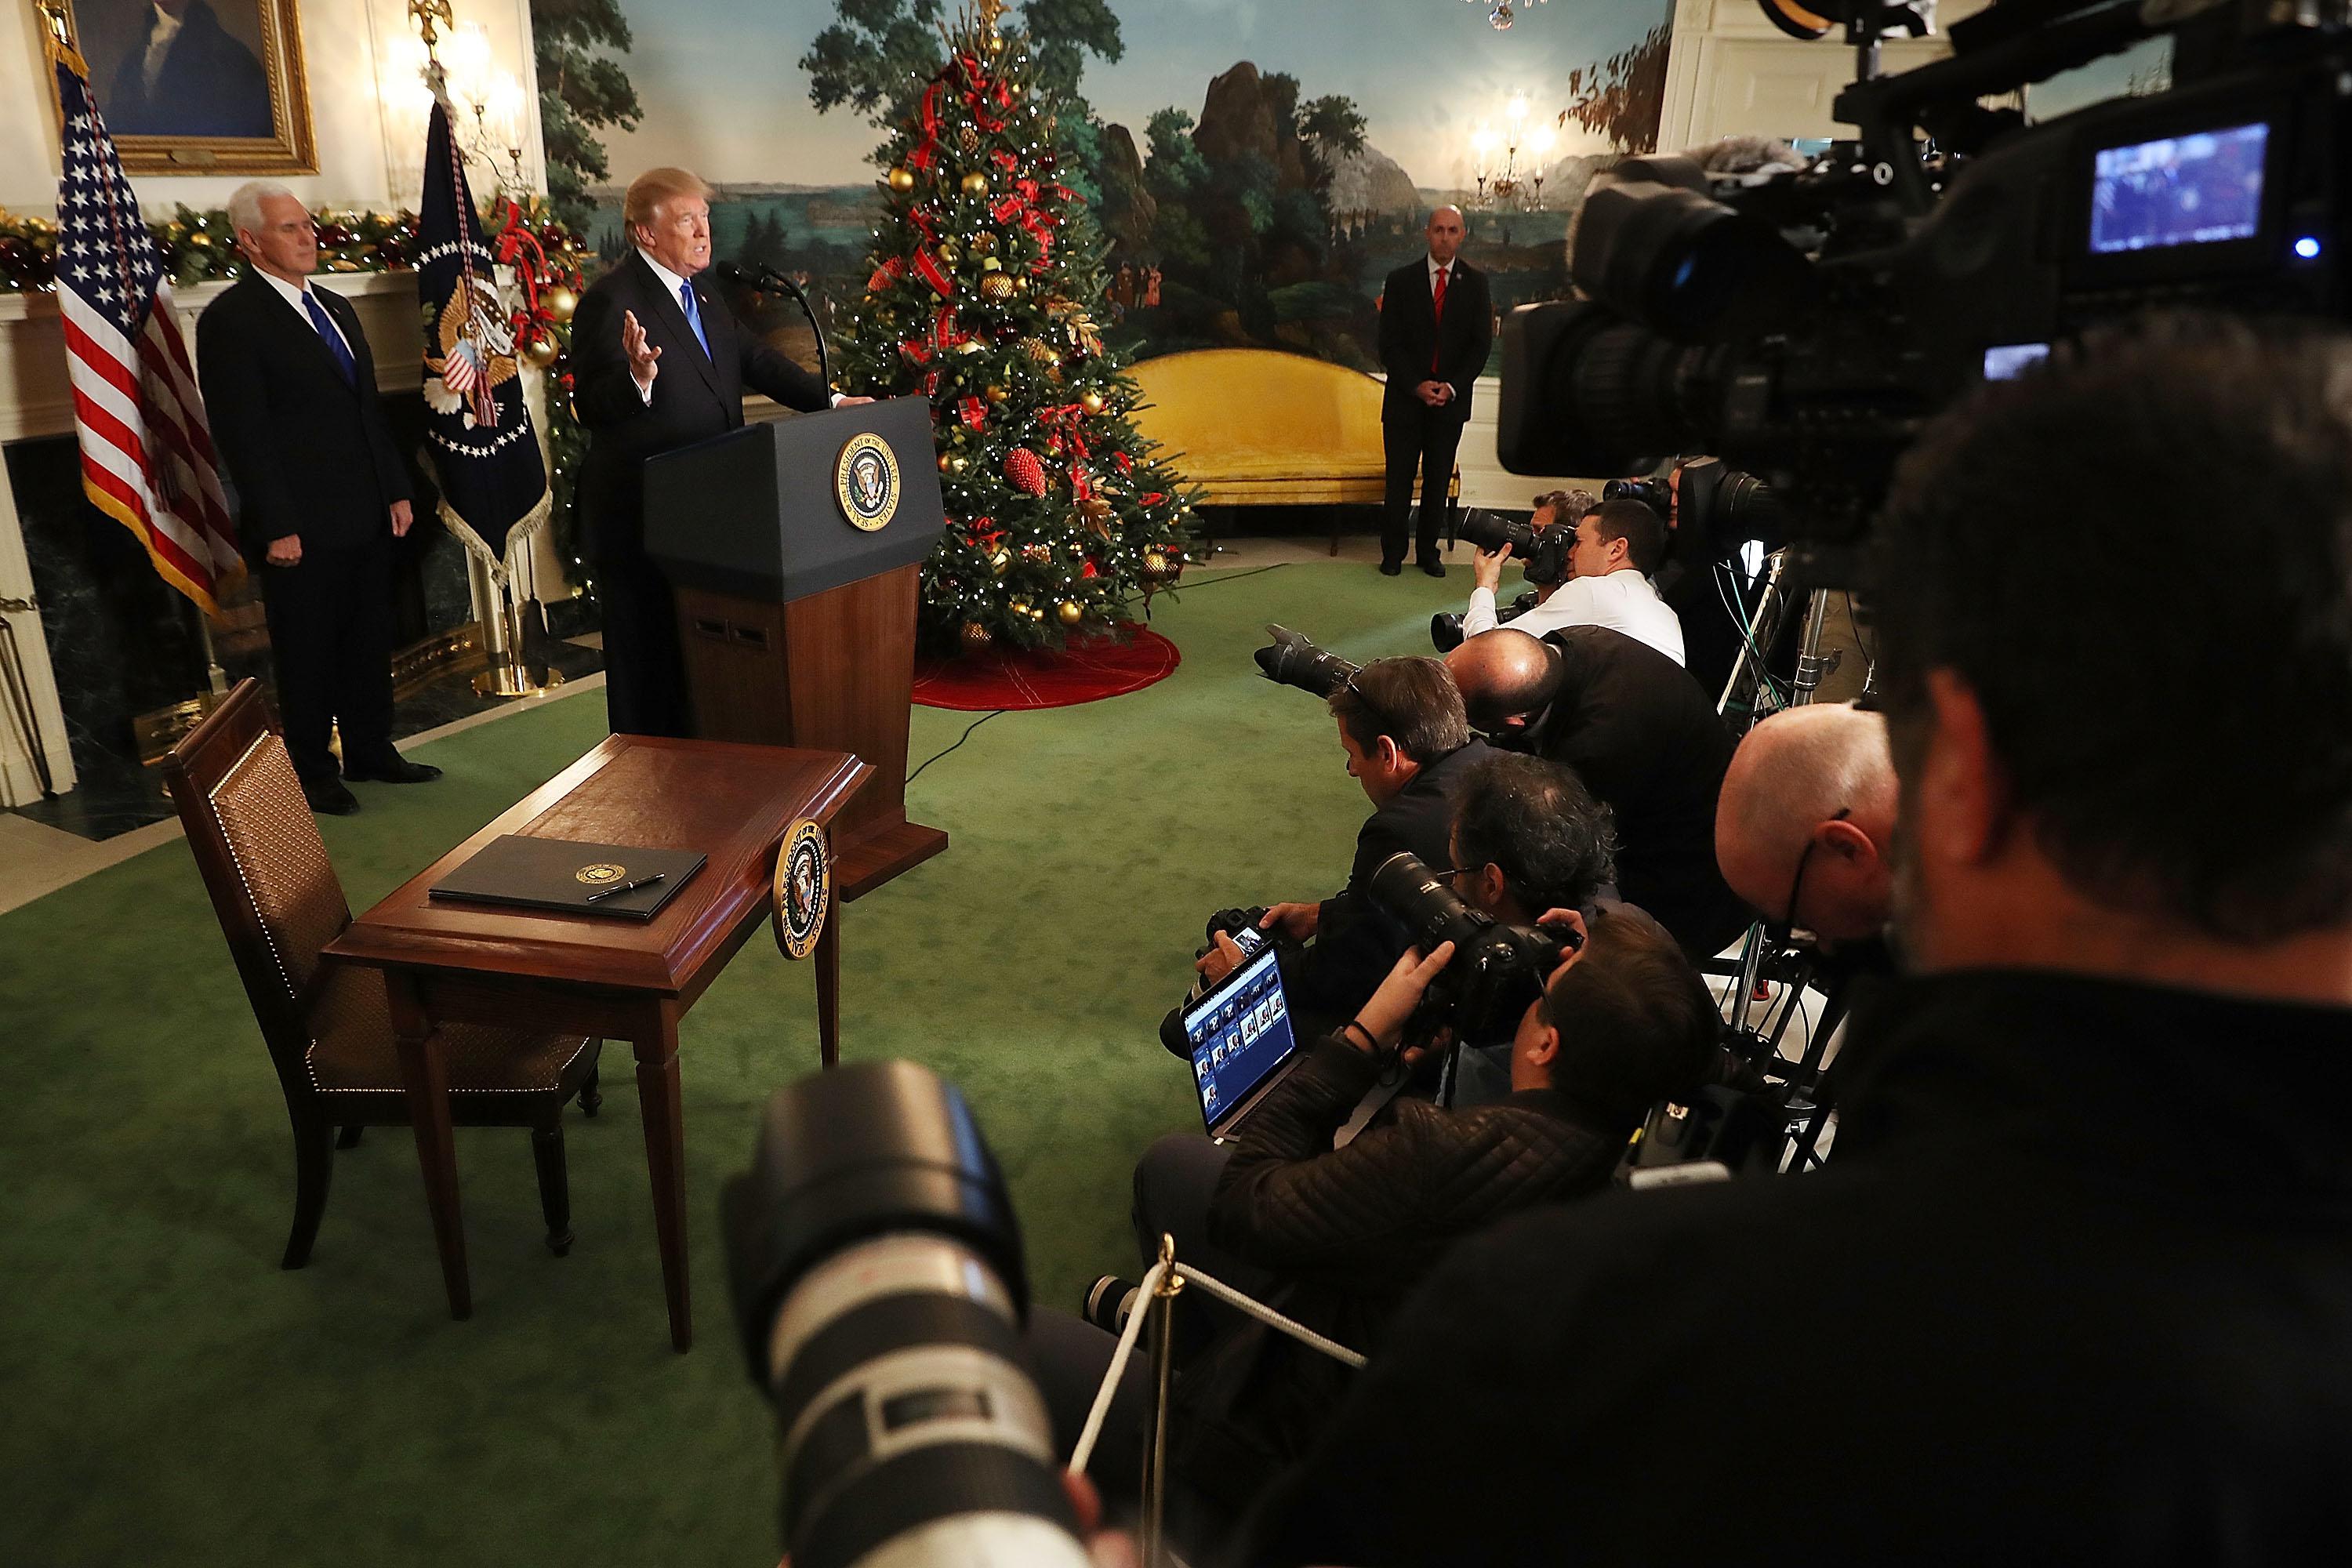 WASHINGTON, DC - DECEMBER 06:  U.S. President Donald Trump announces that the U.S. government will formally recognize Jerusalem as the capital of Israel with Vice President Mike Pence (L) in the Diplomatic Reception Room at the White House December 6, 2017 in Washington, DC. In keeping with a campaign promise, Trump said the United States will move its embassy from Tel Aviv to Jerusalem sometime in the next few years. No other country has its embassy in Jerusalem.  (Photo by Chip Somodevilla/Getty Images)